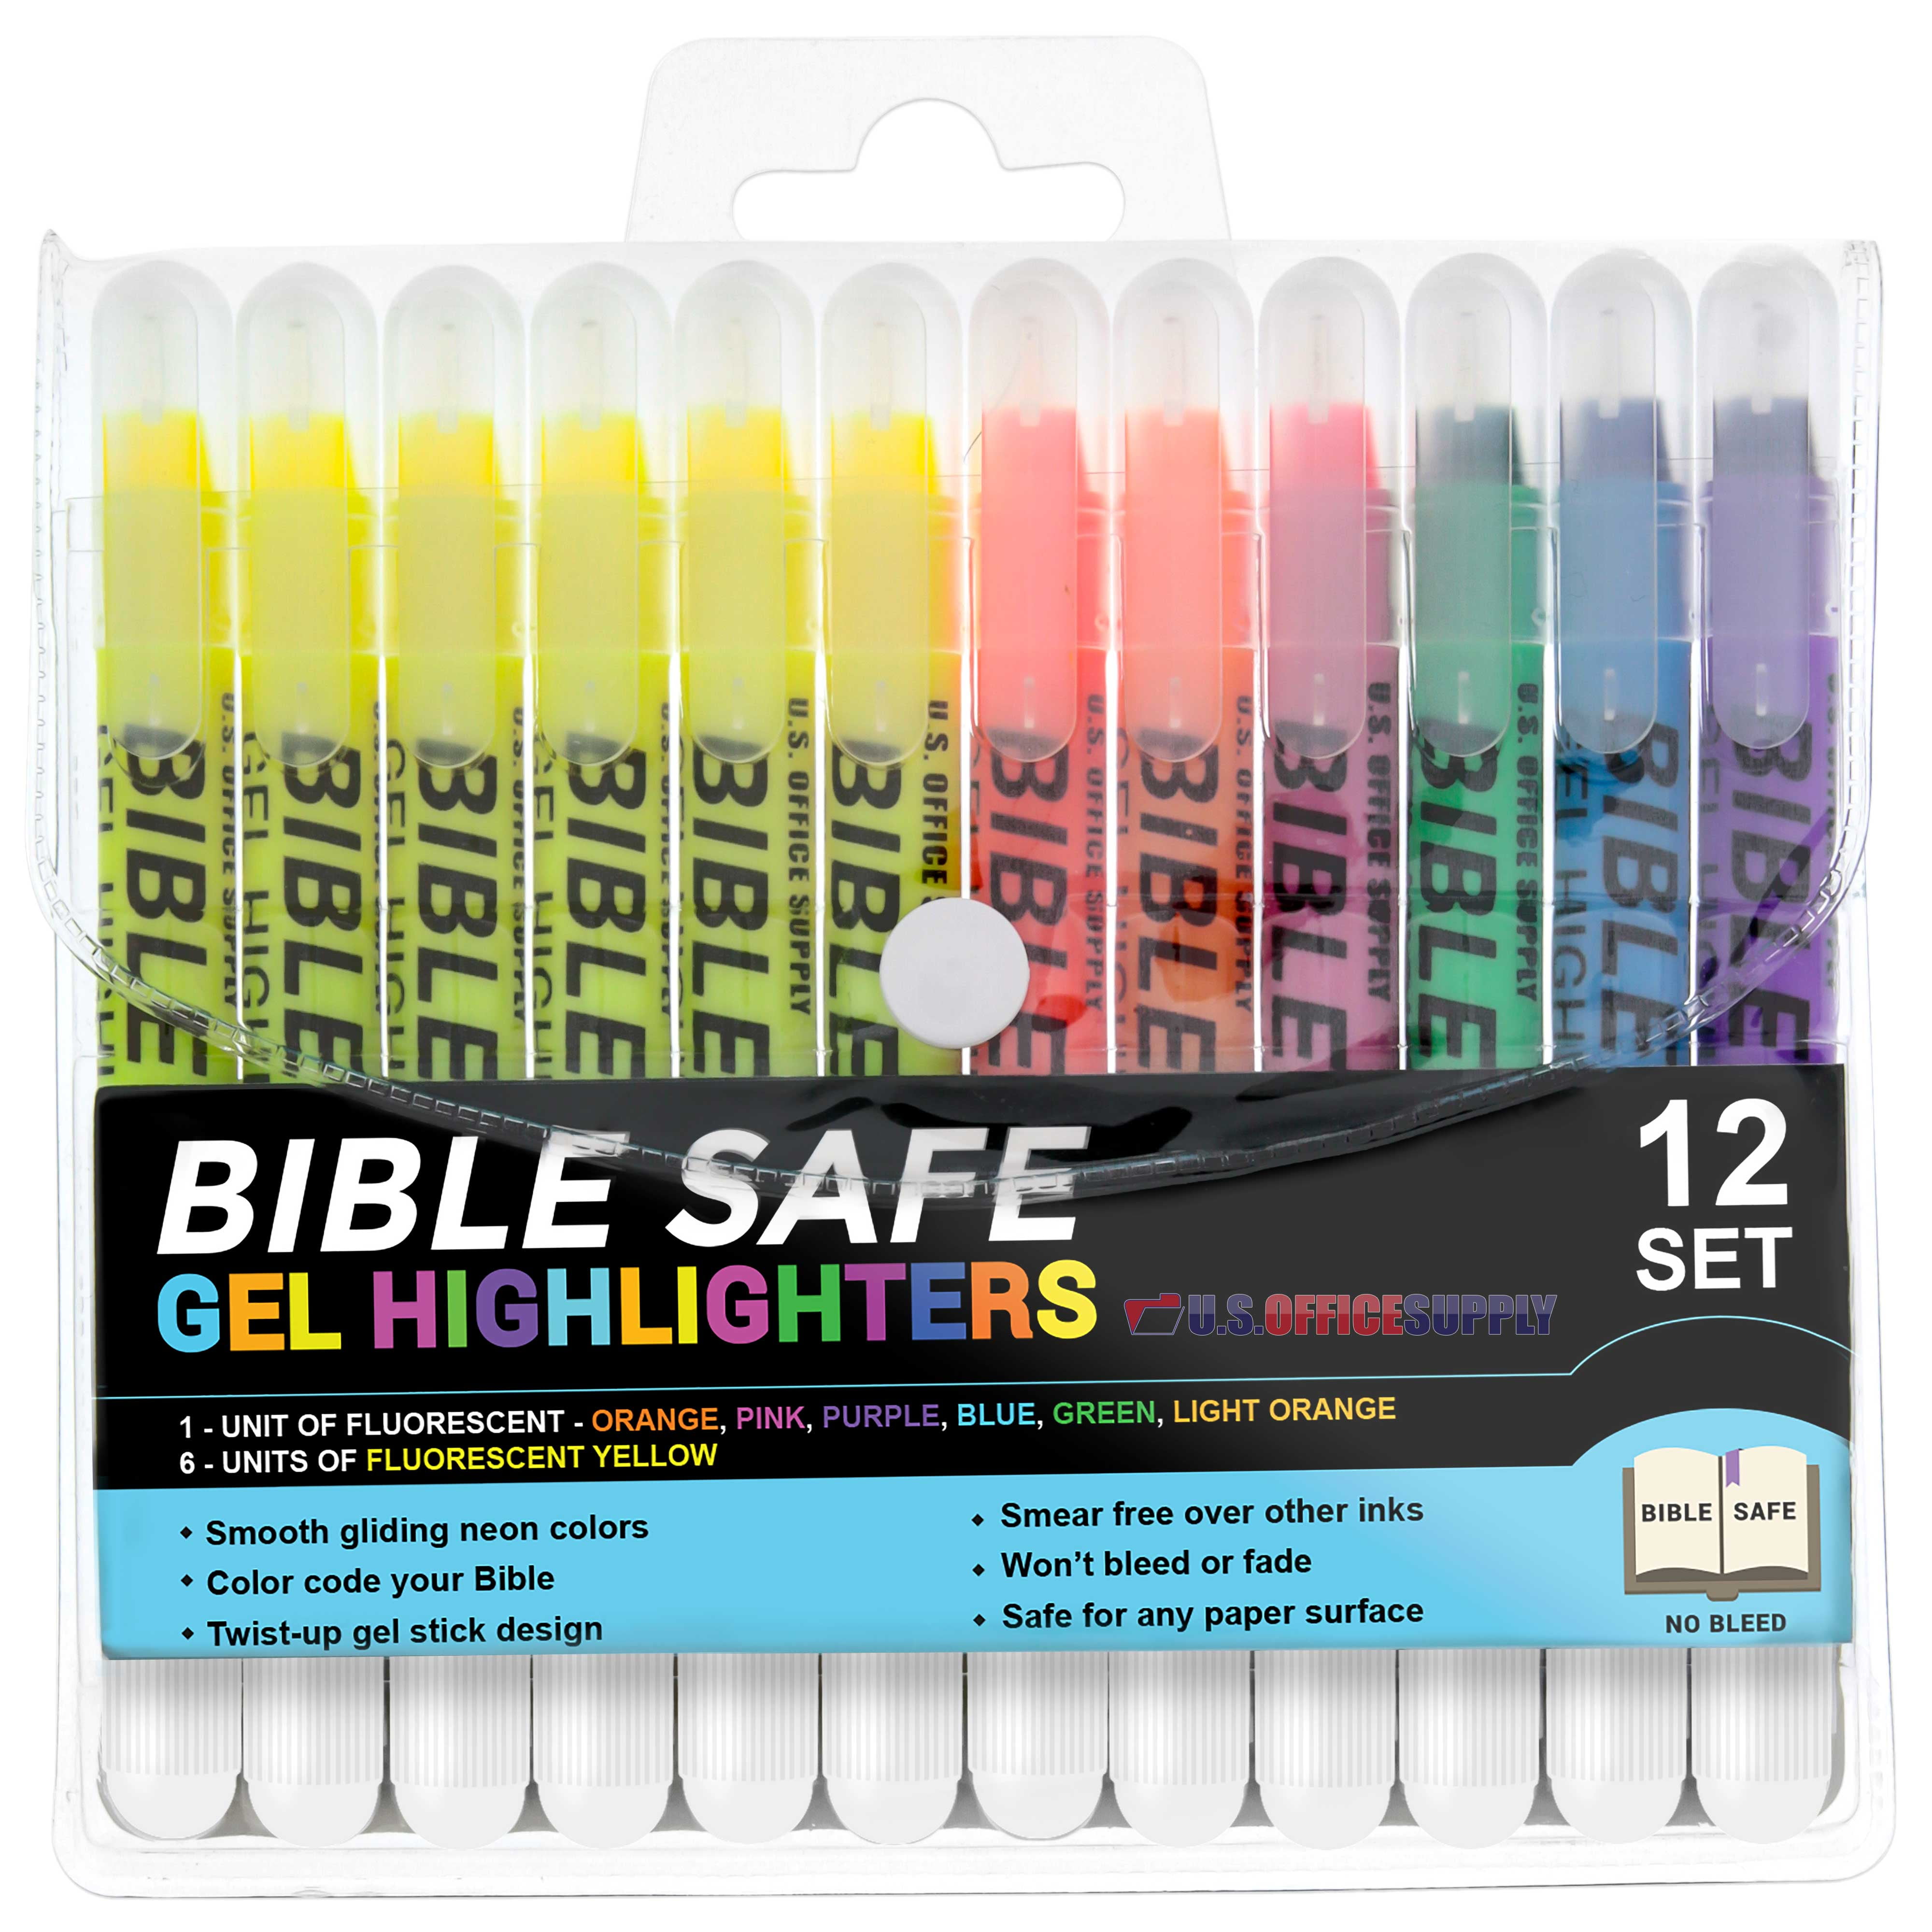 Study Guide US Office Supply Bible Safe Gel Highlighters Pack of 12 Orange Won't Bleed Green Fade or Smear Blue Purple Set with 6 Bright Neon Yellow Highlight Colors Plus 6 Colors Pink 